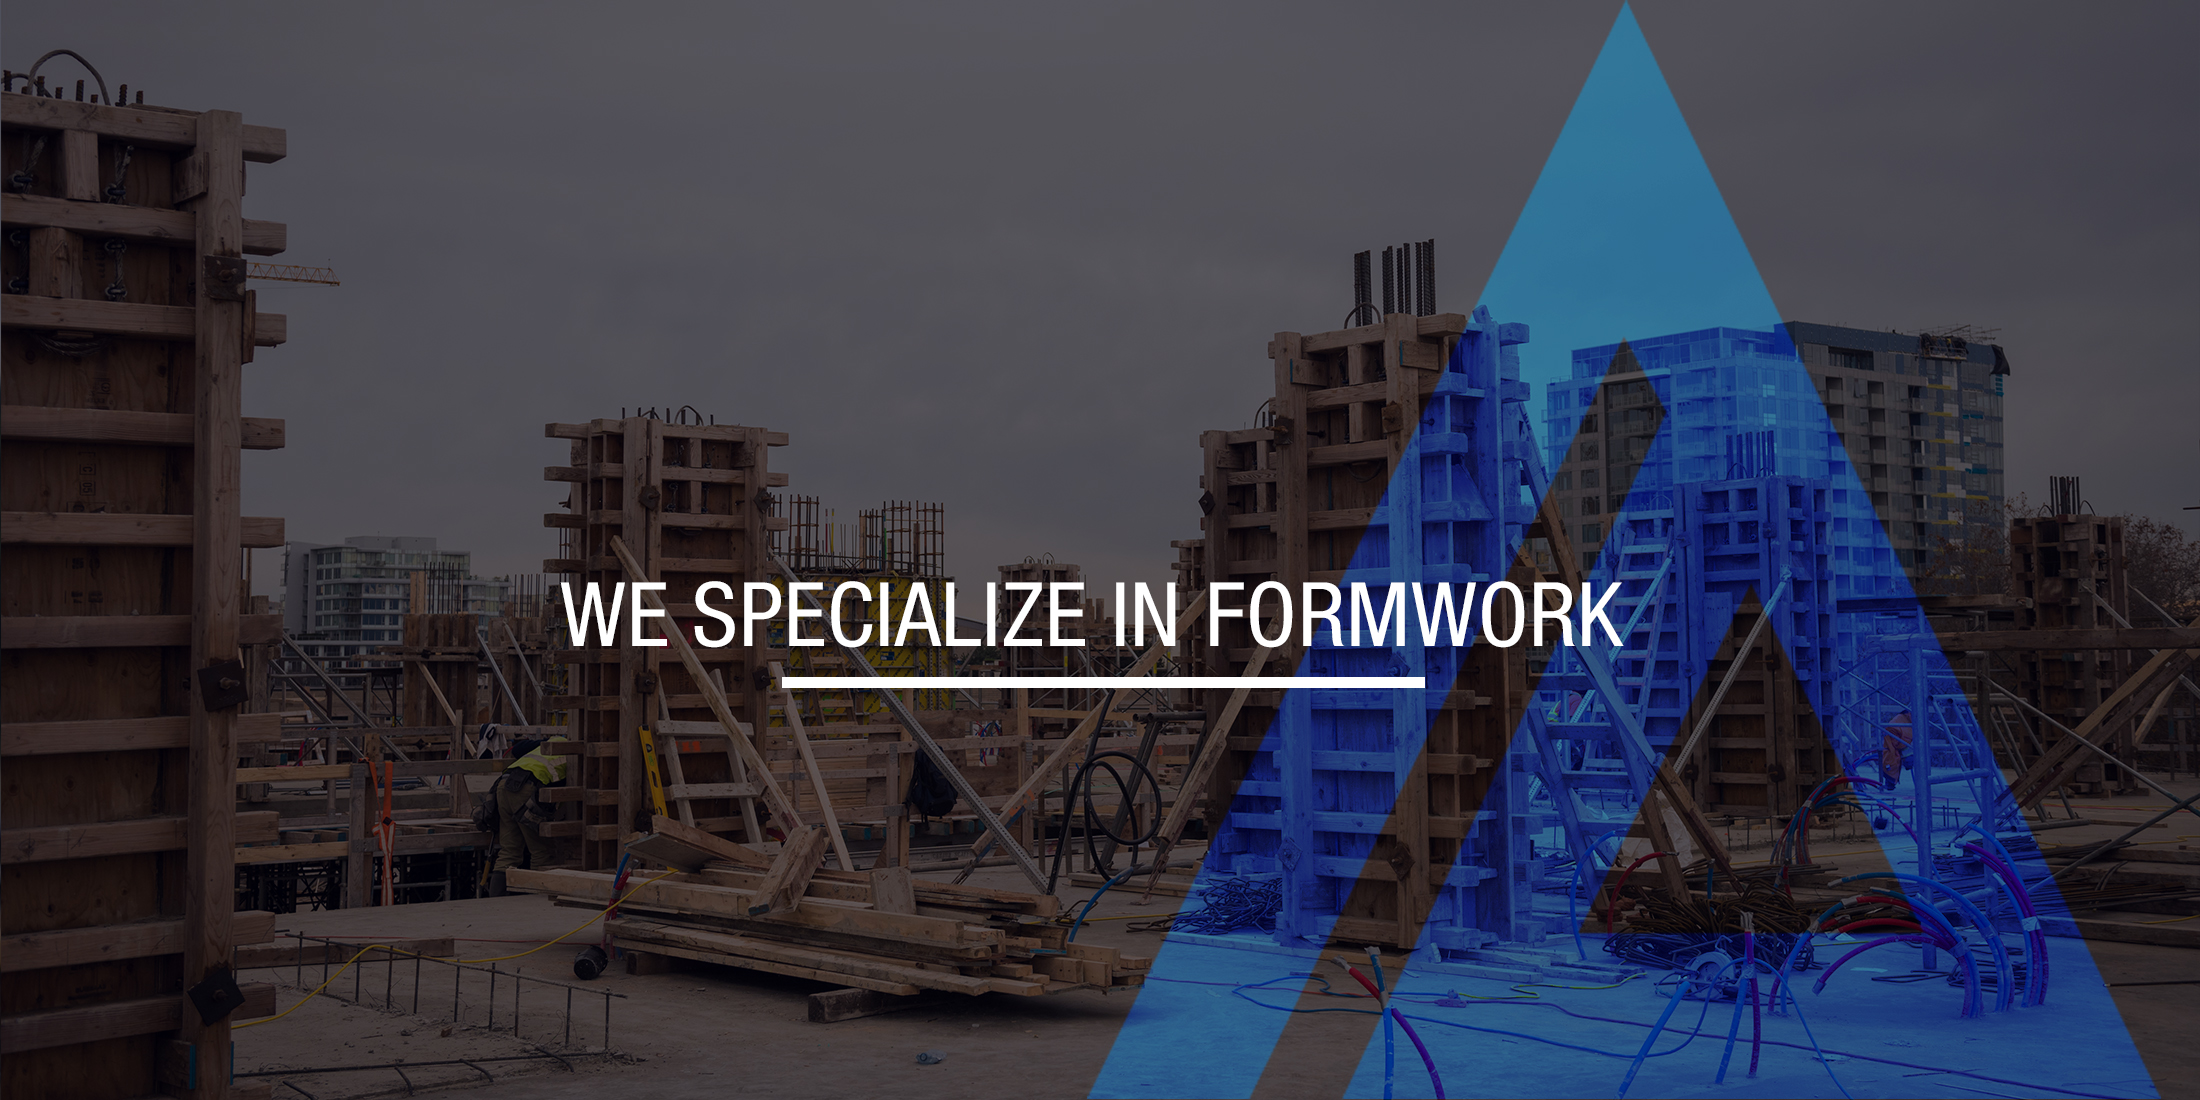 We specialize in FORMWORK